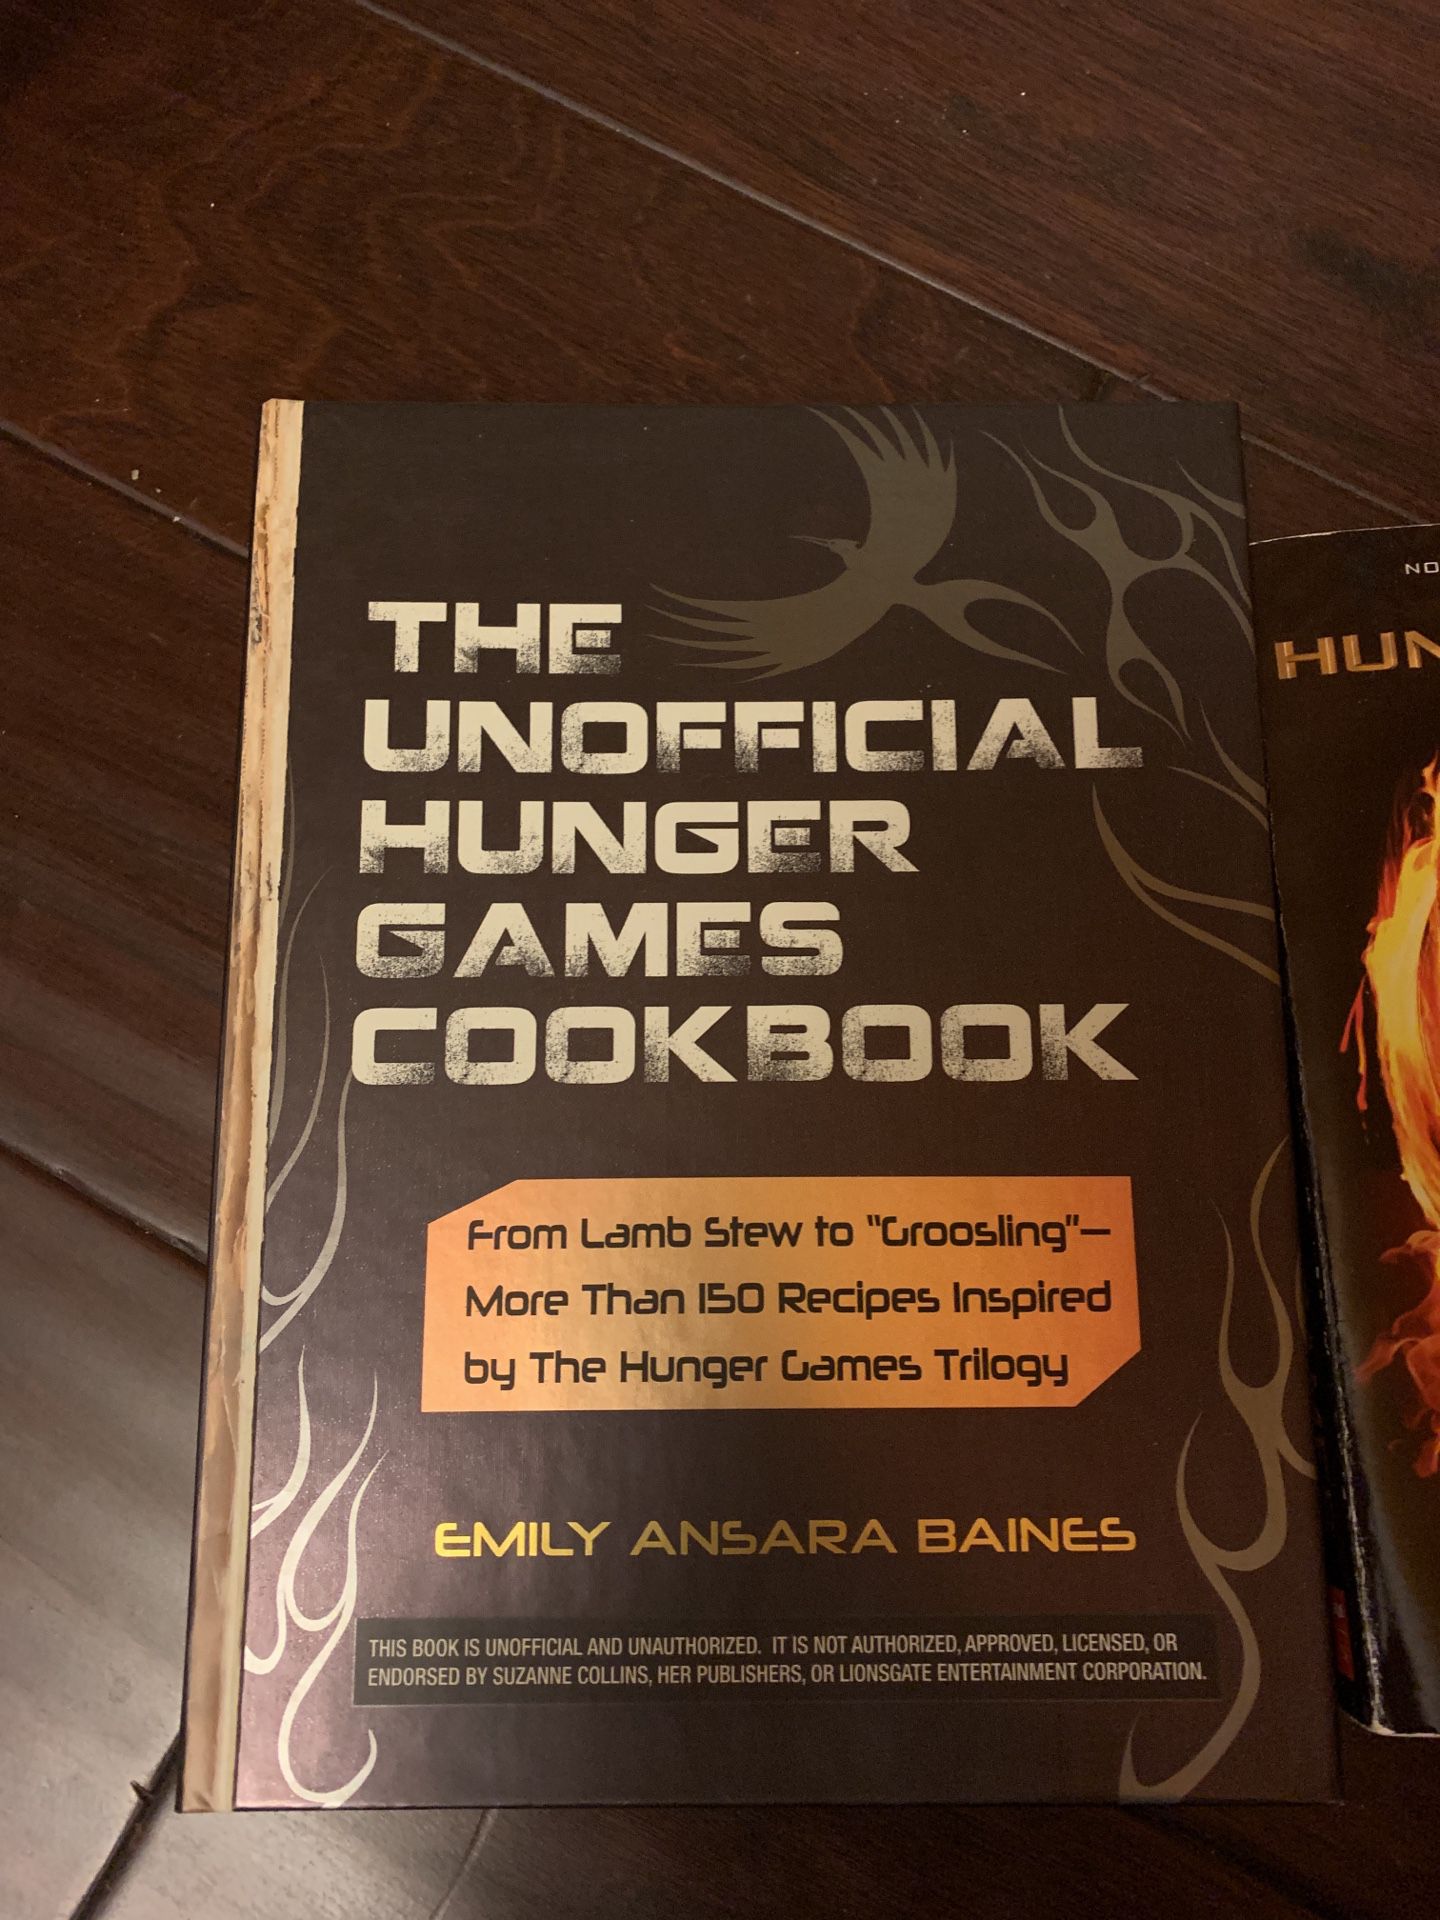 Collection of hunger game books